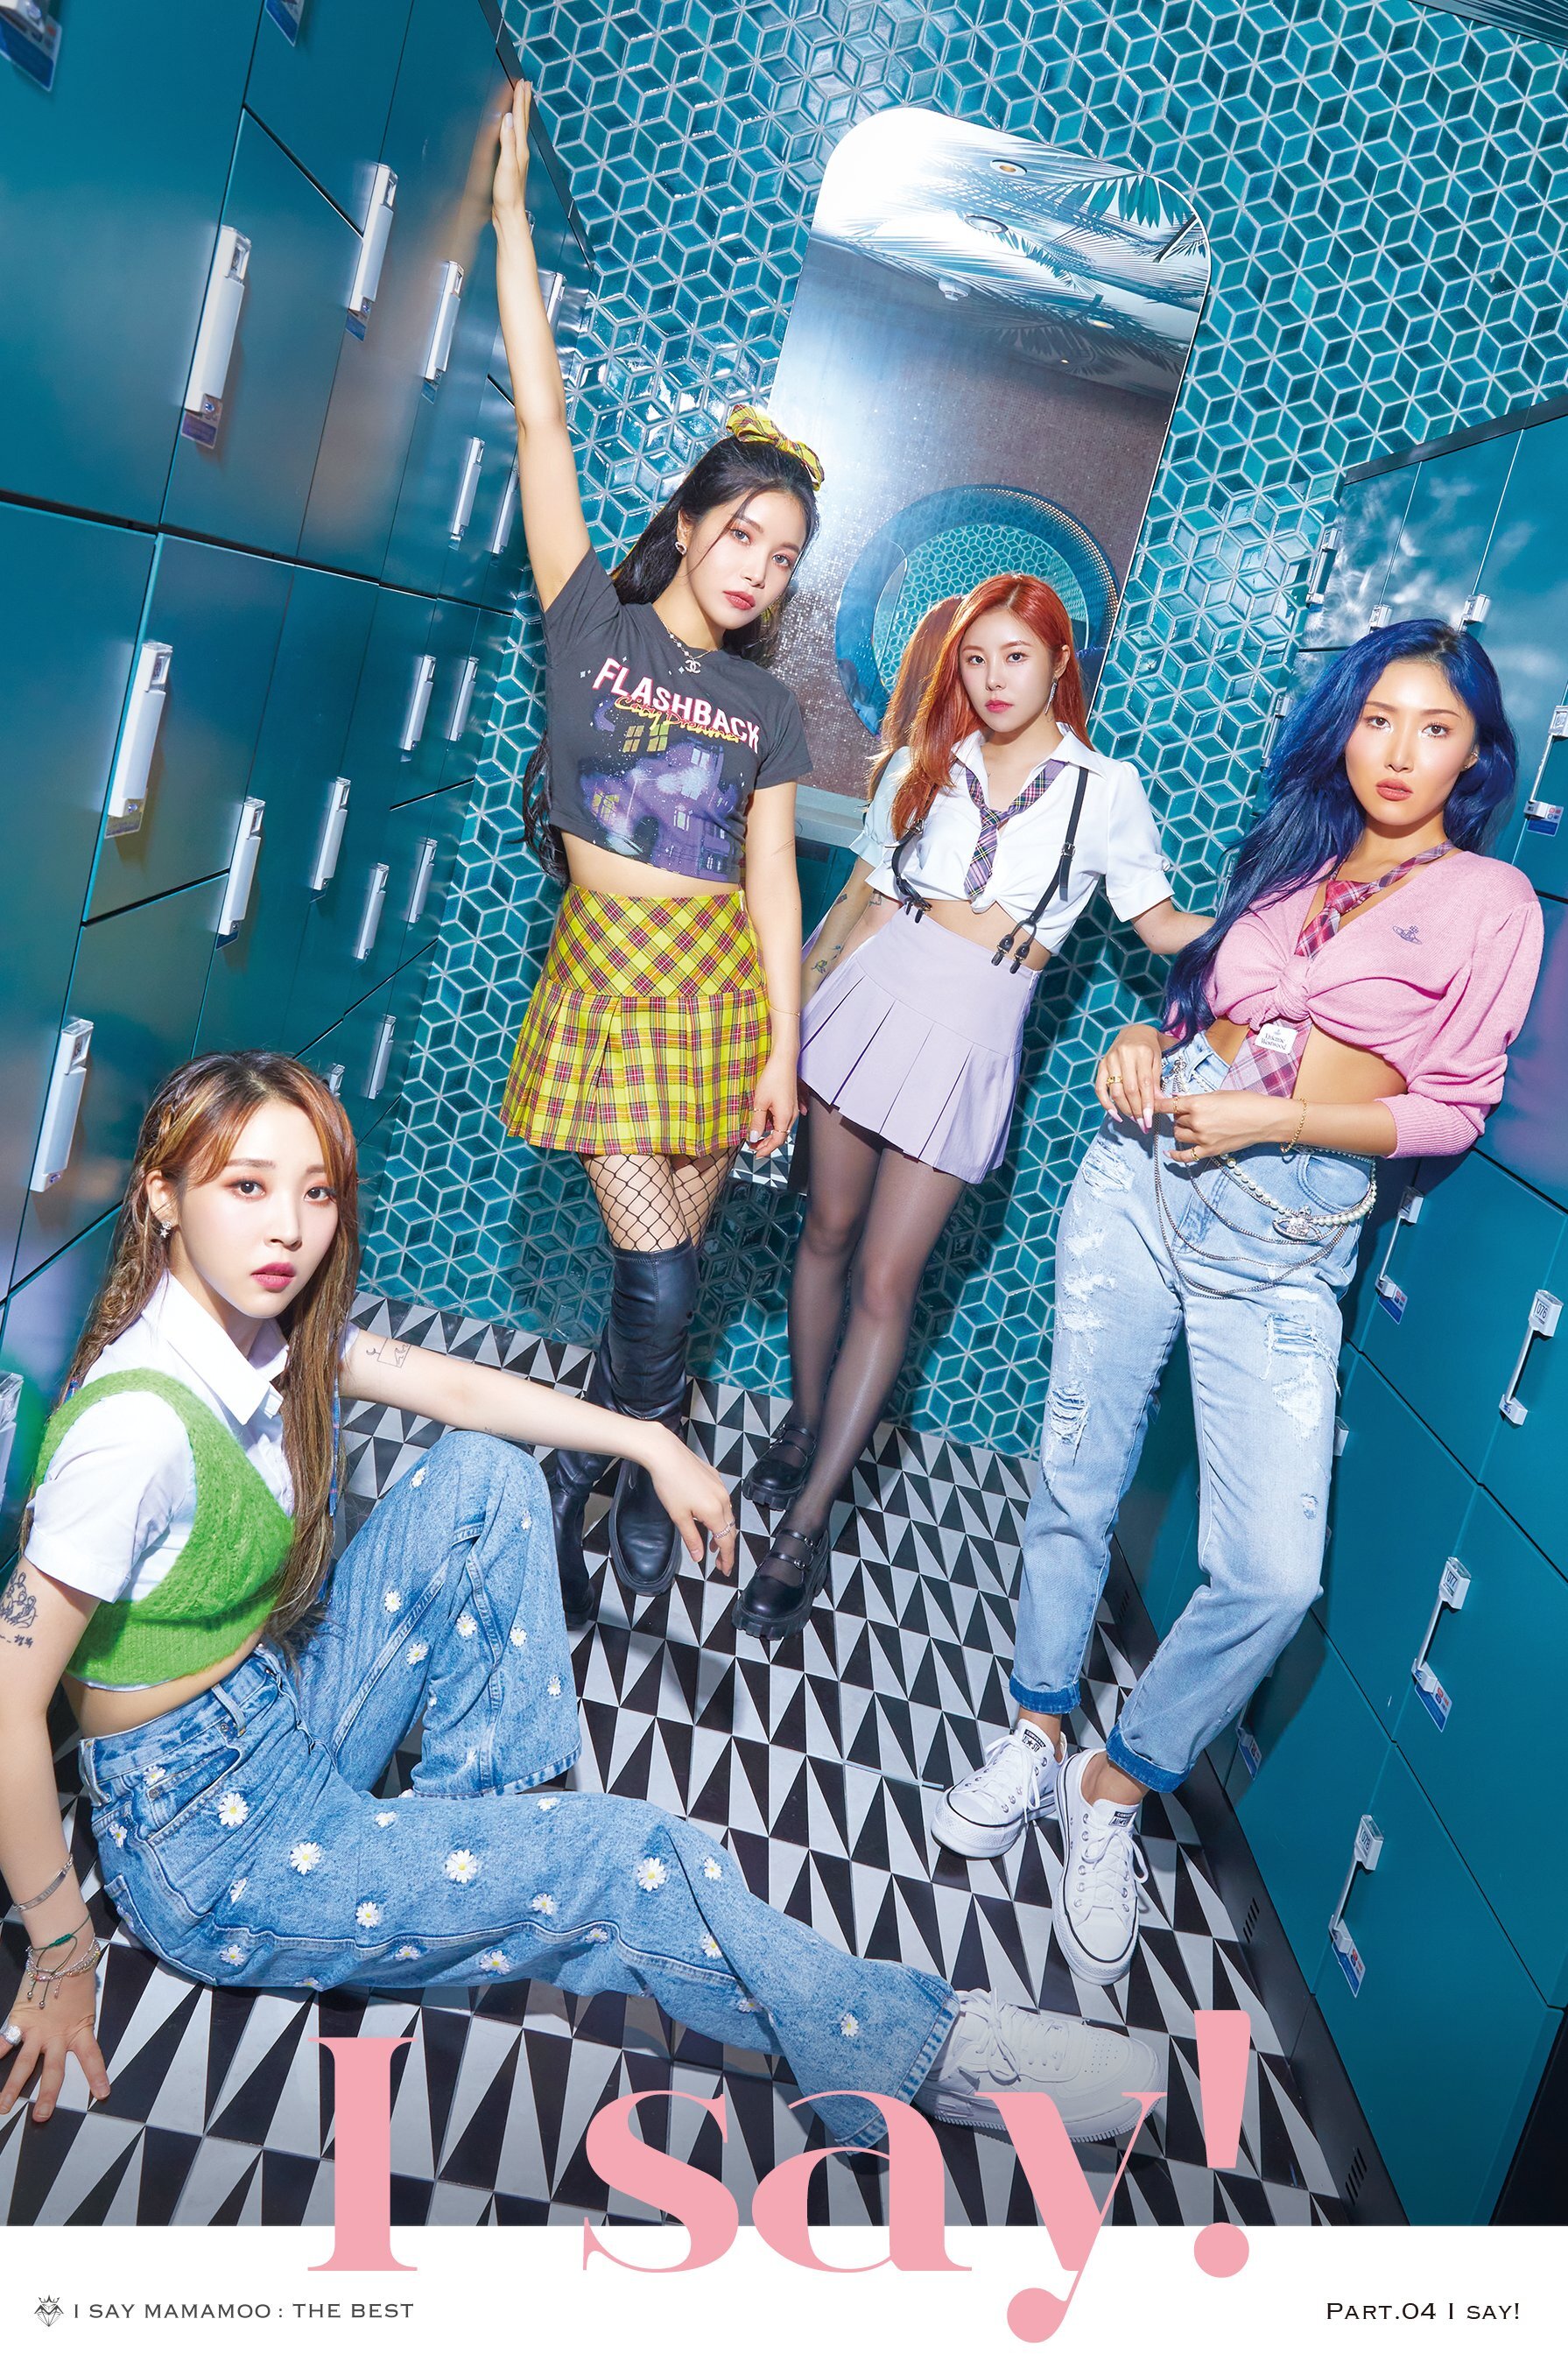 MAMAMOO 'I SAY MAMAMOO : THE BEST' Concept Teaser Images | kpopping